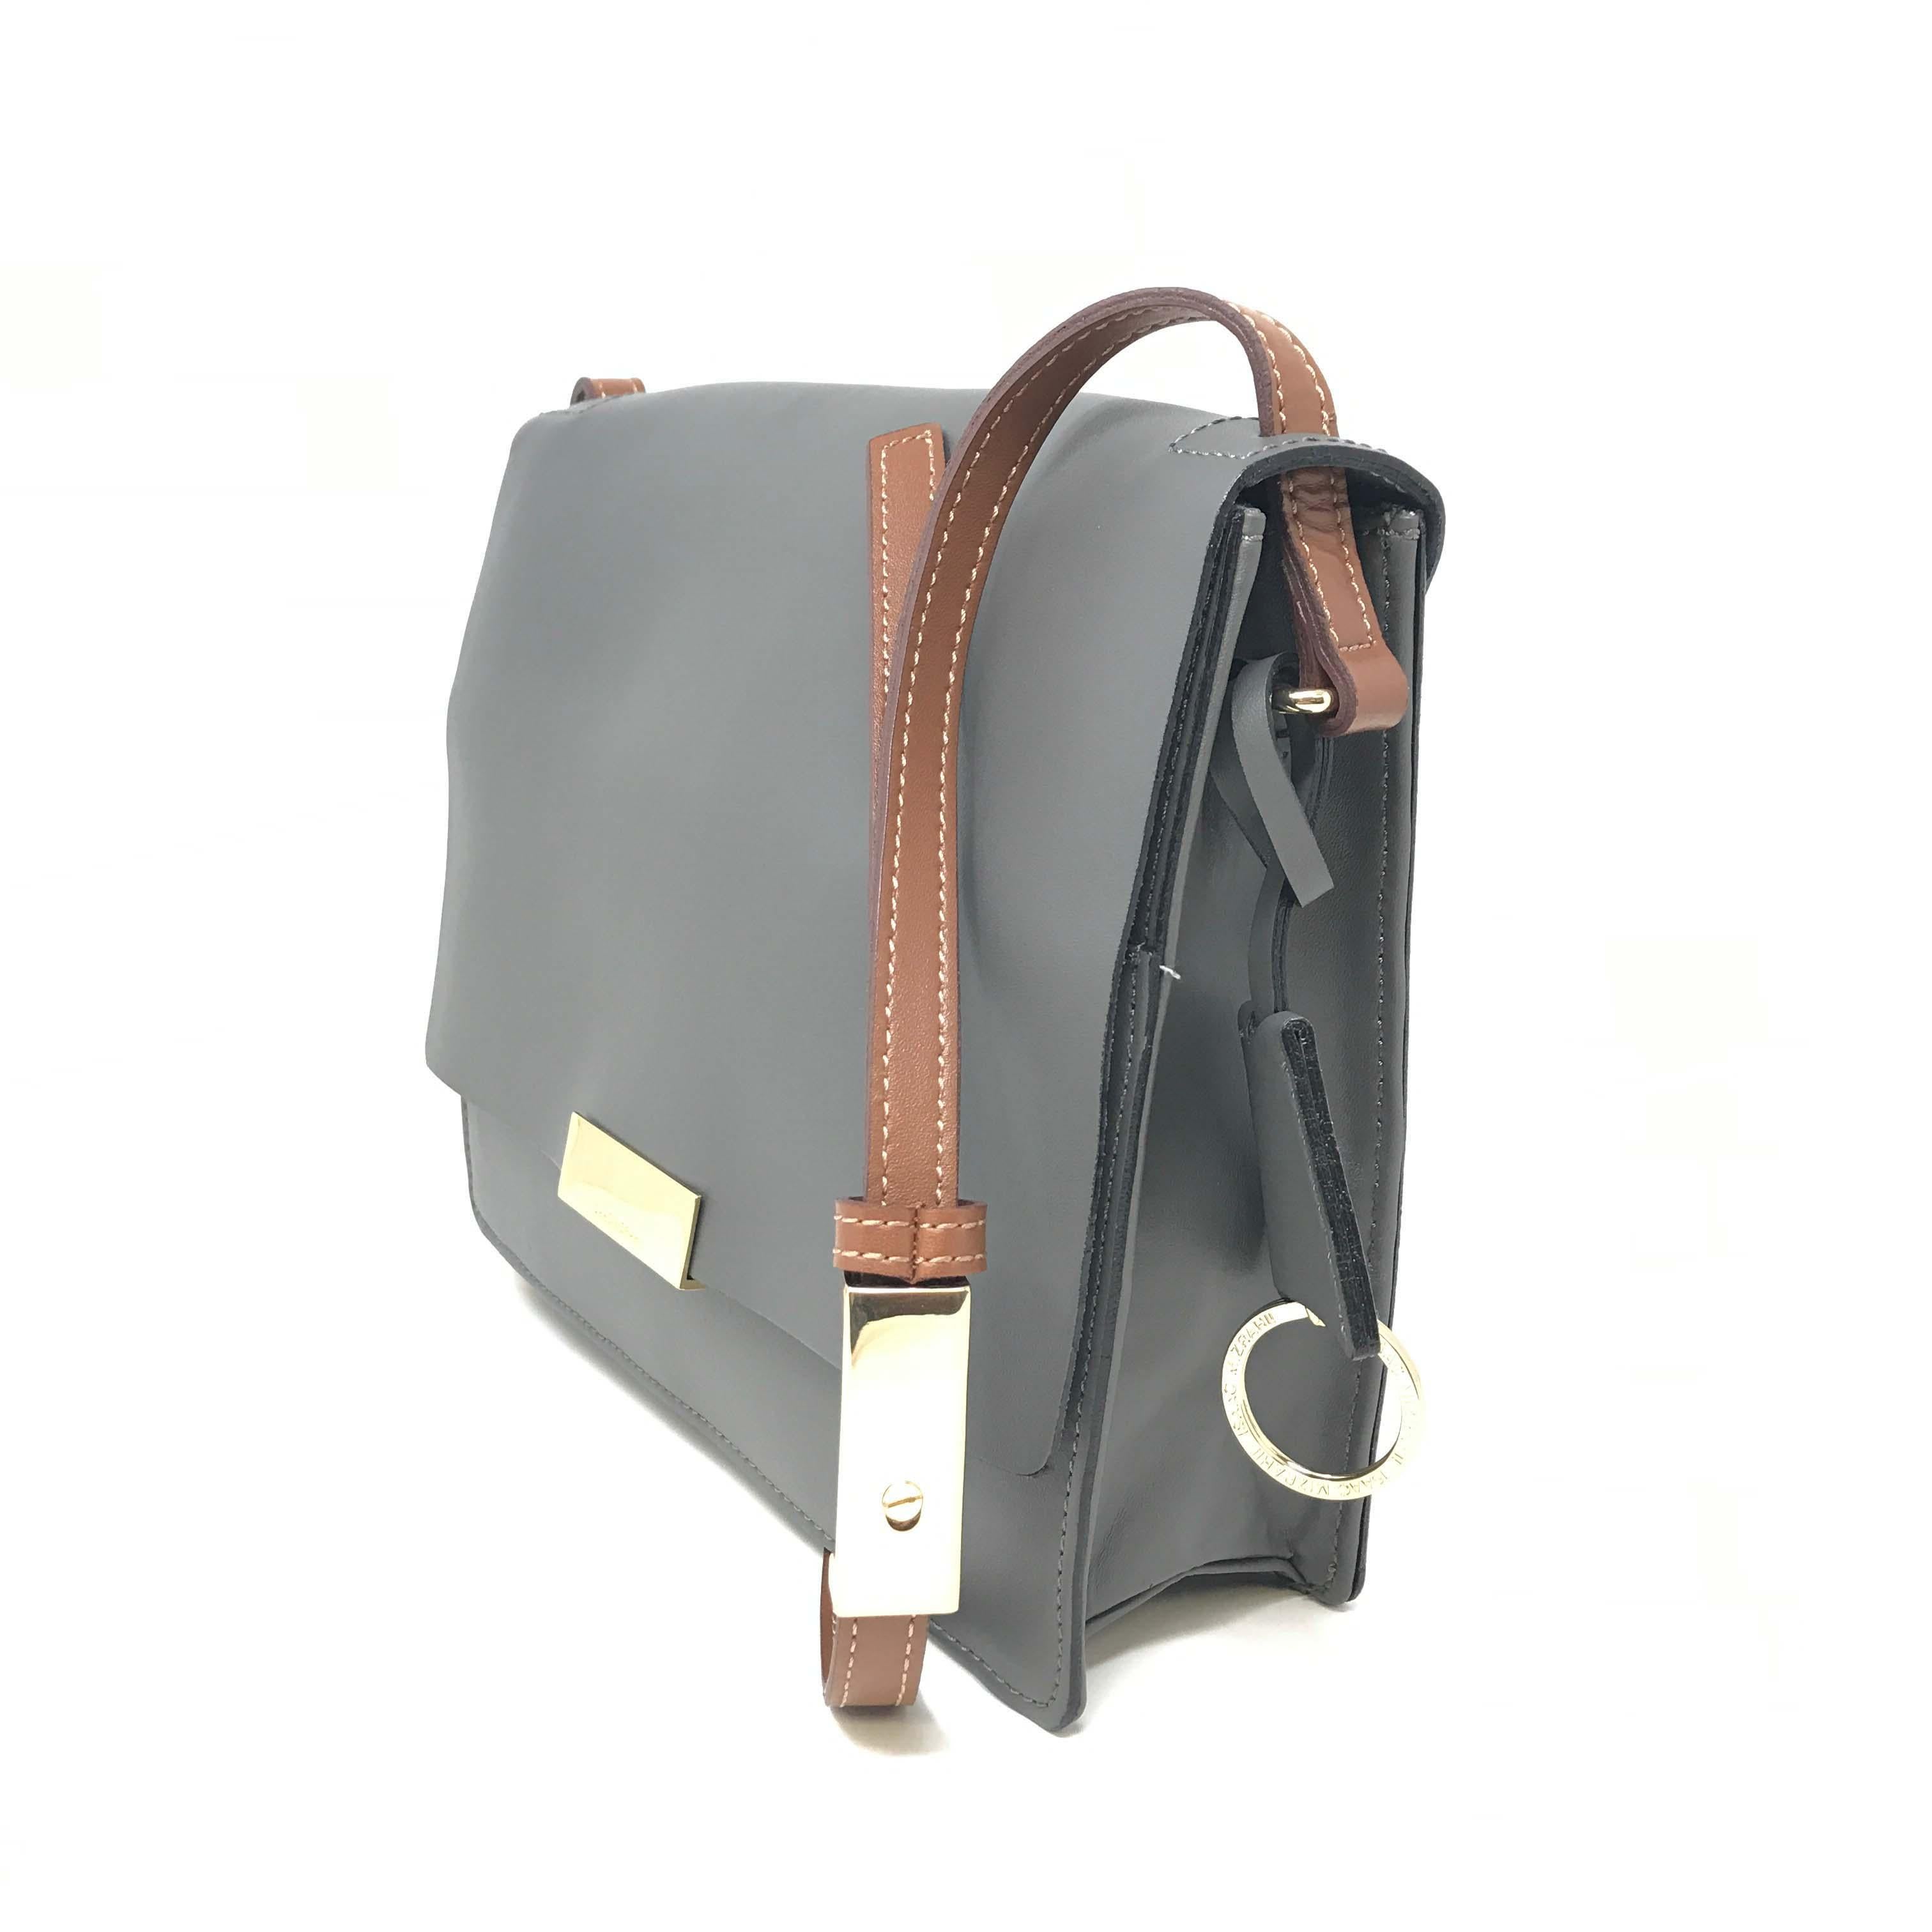 This 100% authentic Isaac Mizrahi Live! A271225 smoke color whitney leather shoulde bag is a new and does not come with box and papers. It's in excellent condition. 
Details:
Brand	Isaac Mizrahi
Strap